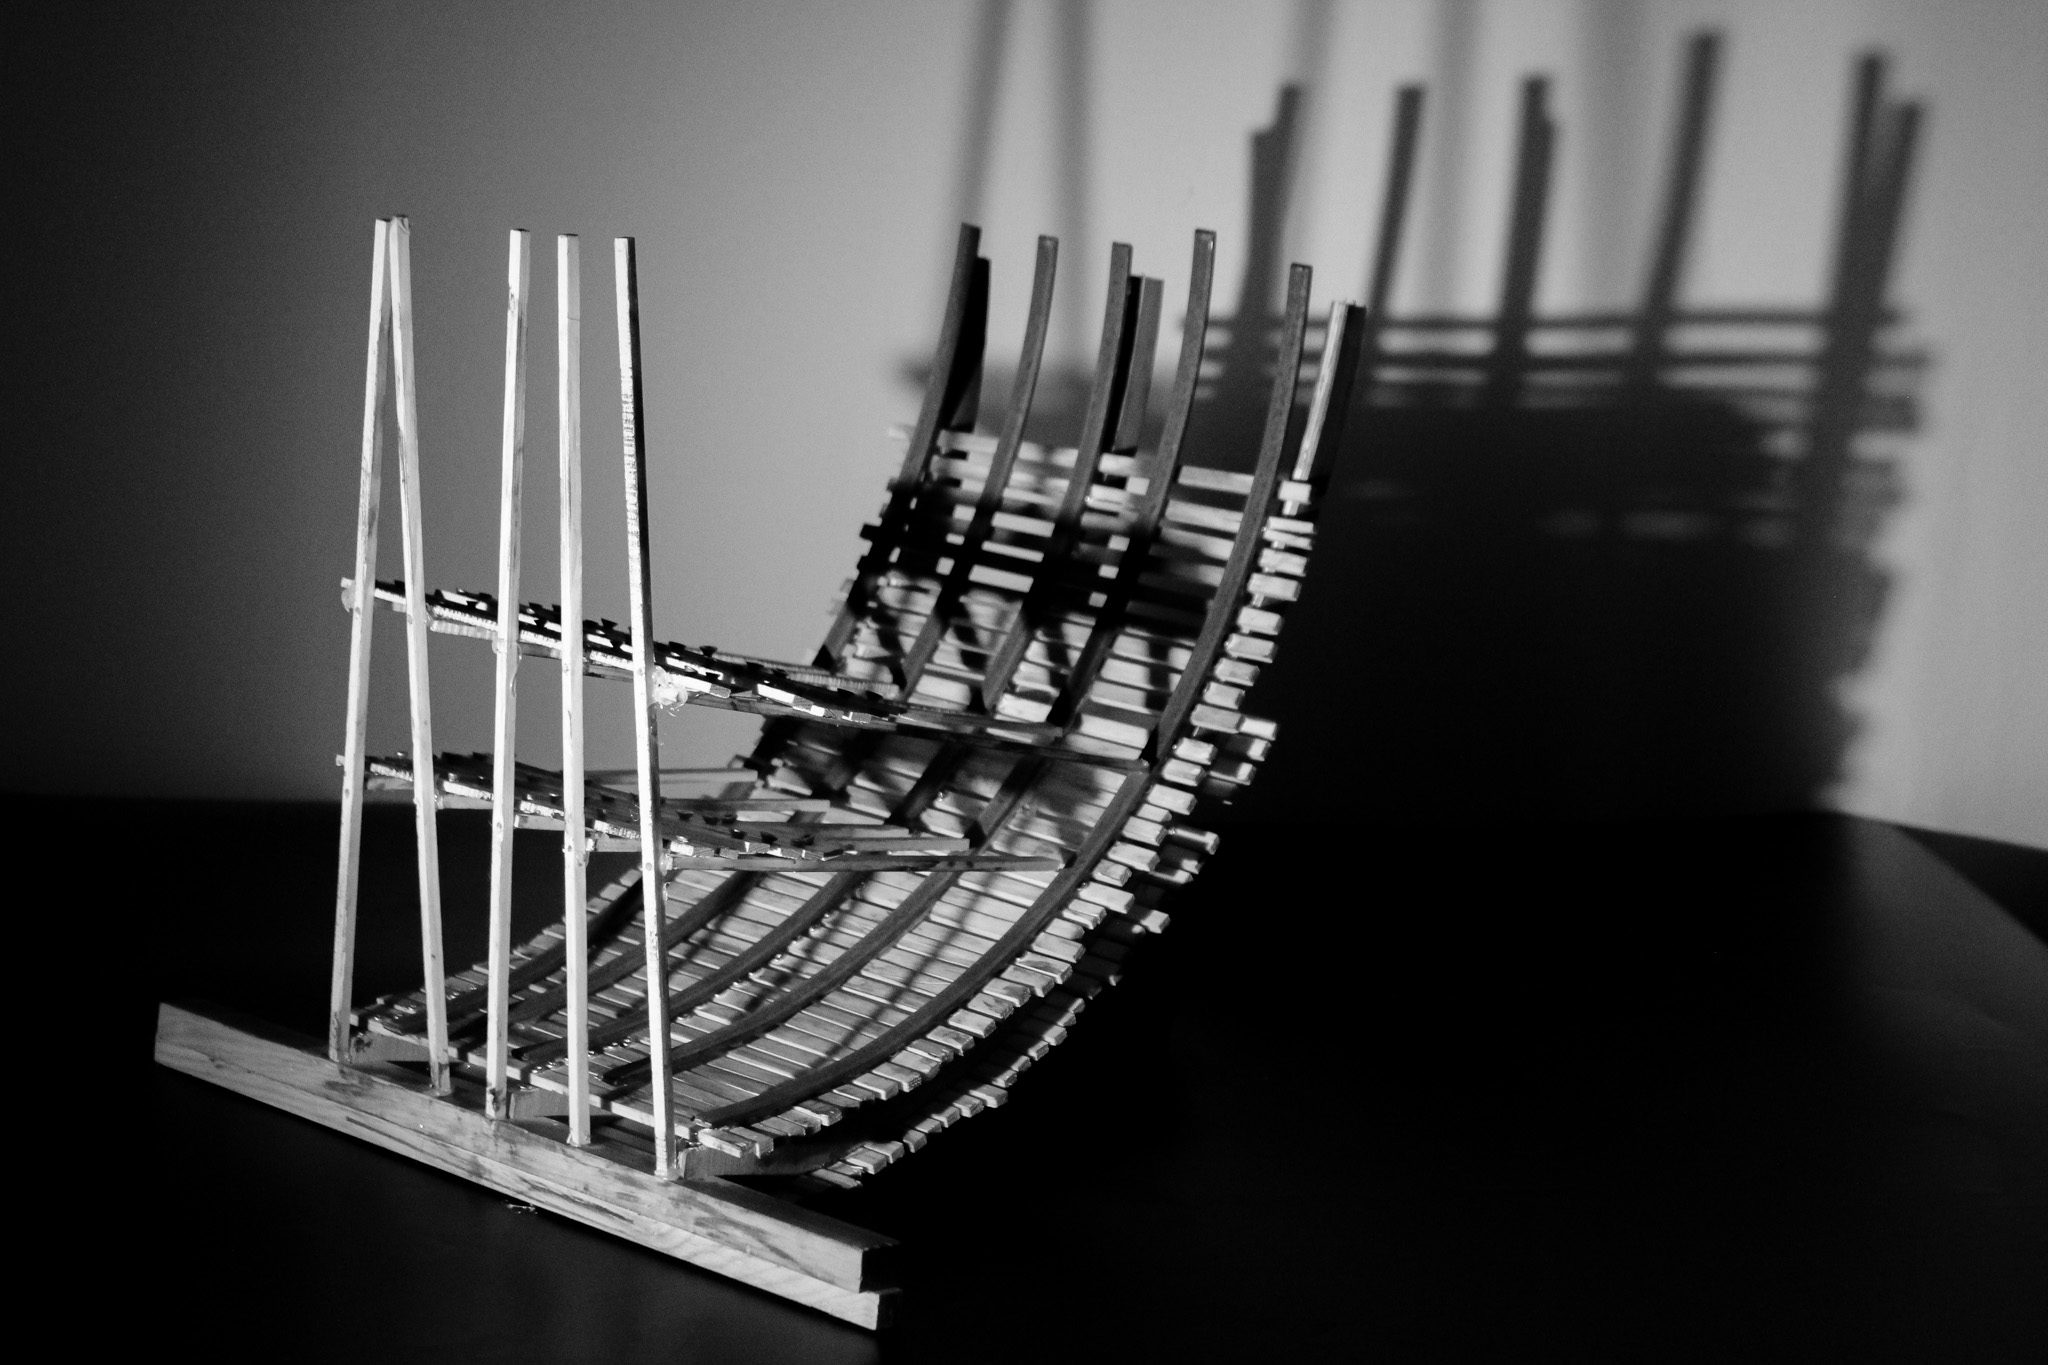 The image shows a delicate shipwreck model made from plywood and steel which sharp shadows in the background.